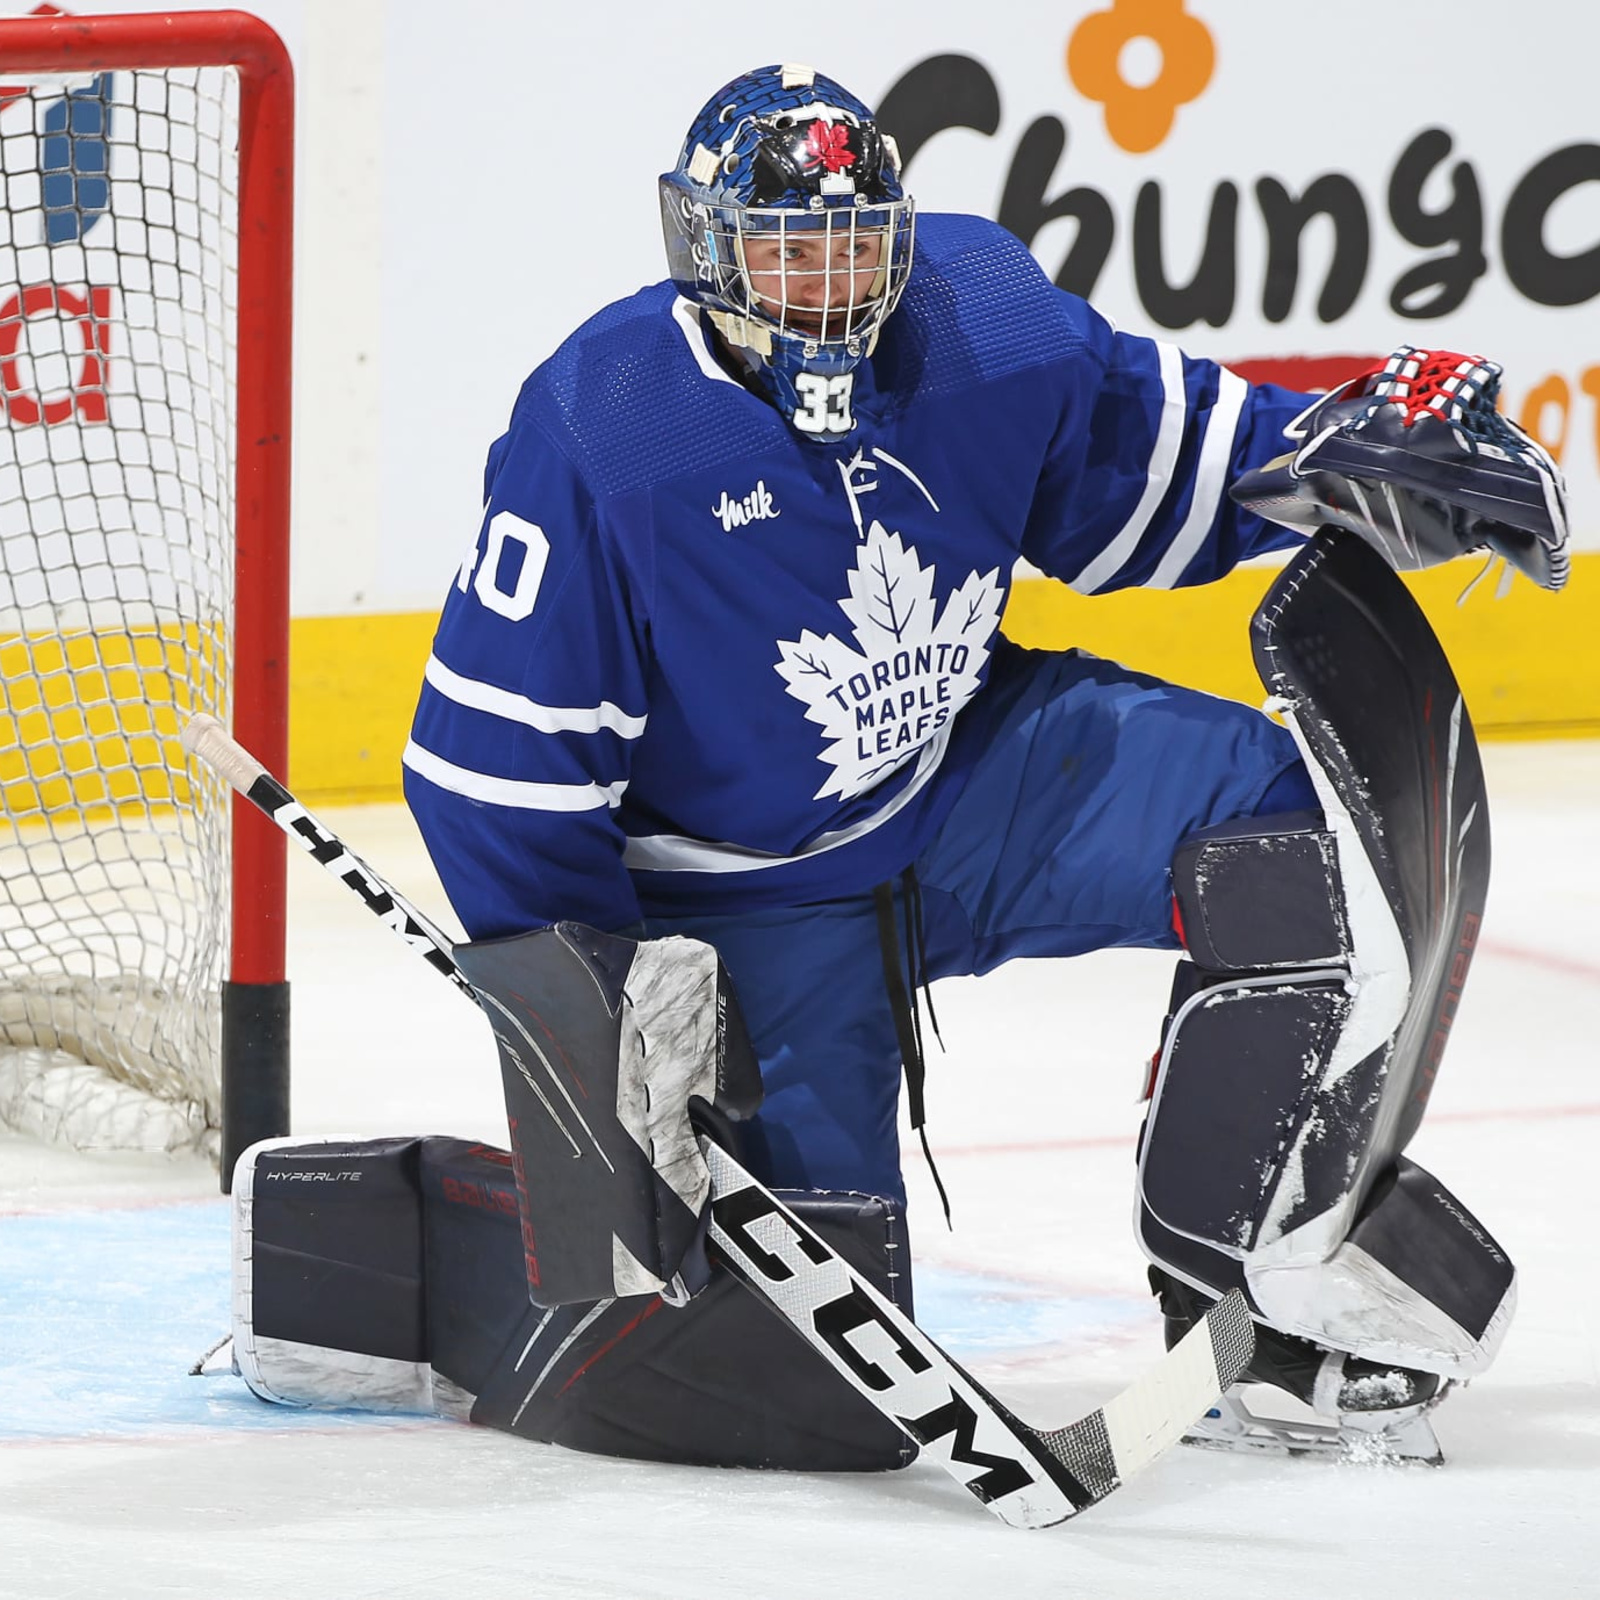 This photo represents my goalie that plays on the Toronto Maple